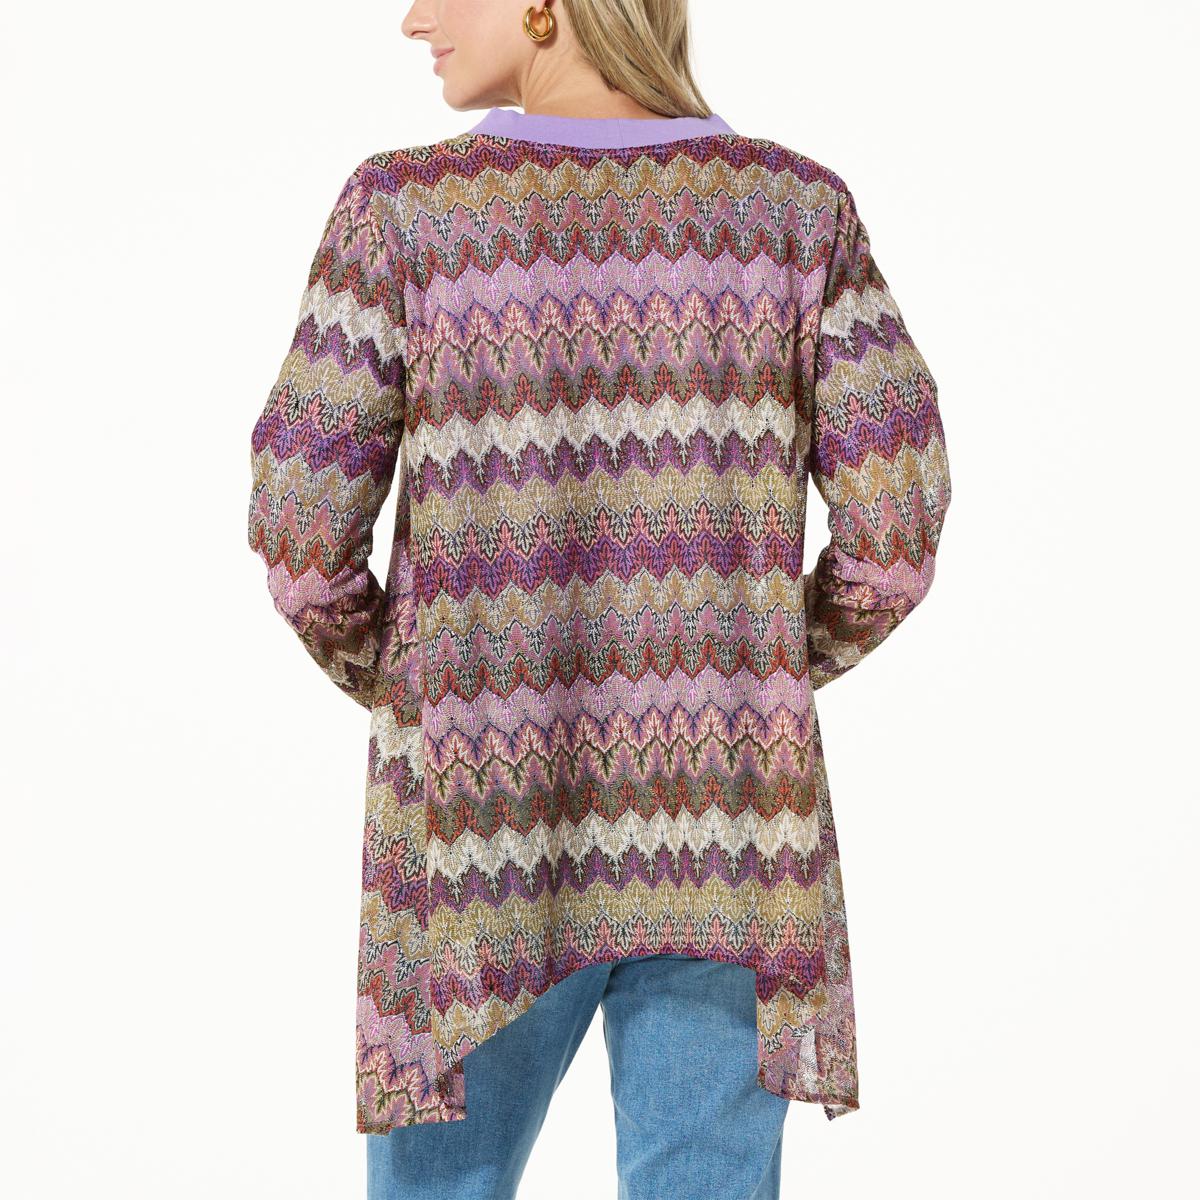 DG2 by Diane Gilman Striped French Terry Waterfall Cardigan